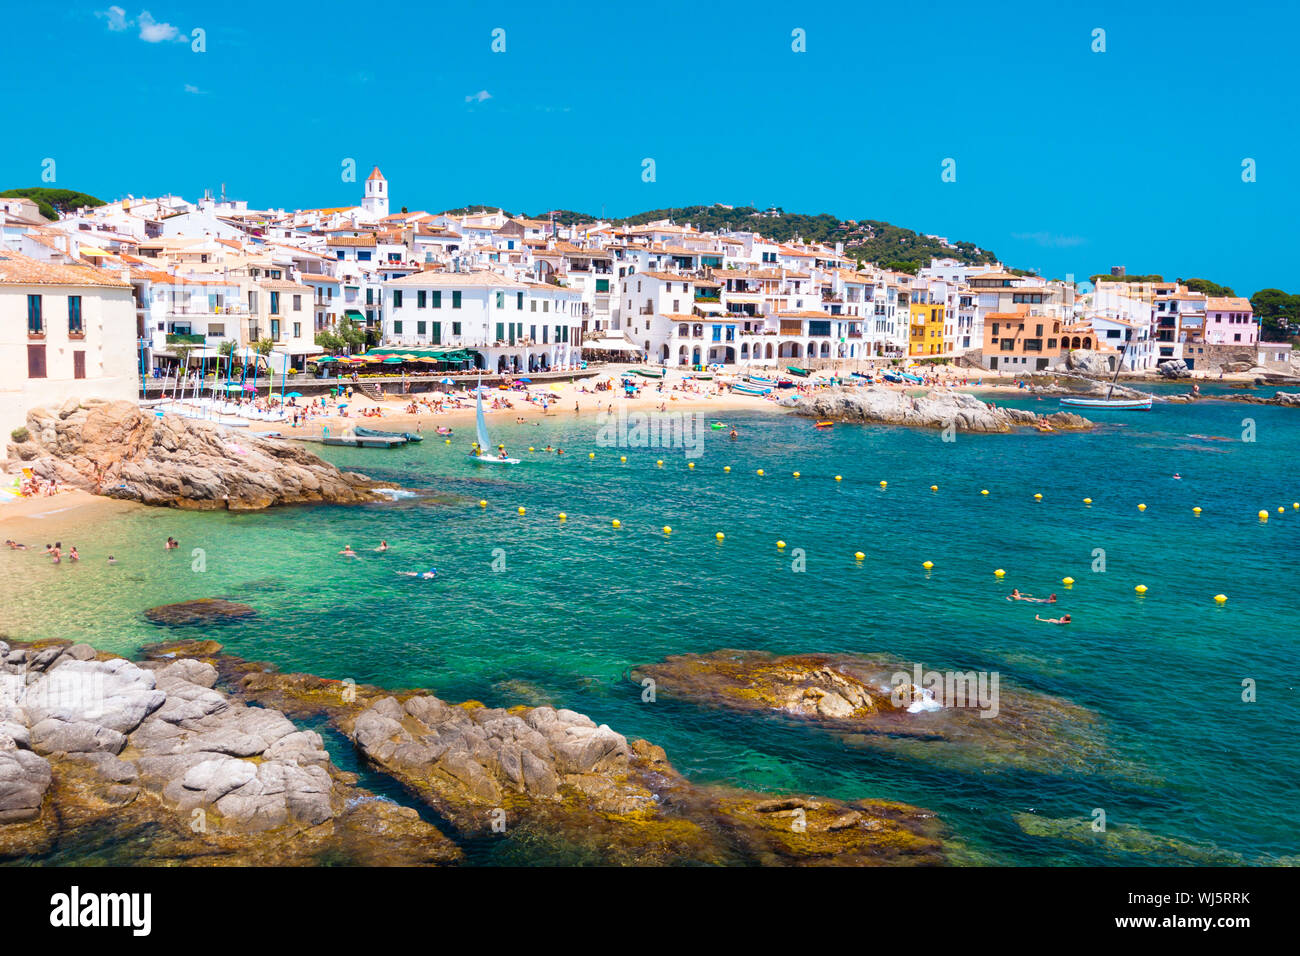 Calella de Palafrugell, traditional whitewashed fisherman village and a popular travel and holiday destination on Costa Brava, Catalonia, Spain. Stock Photo